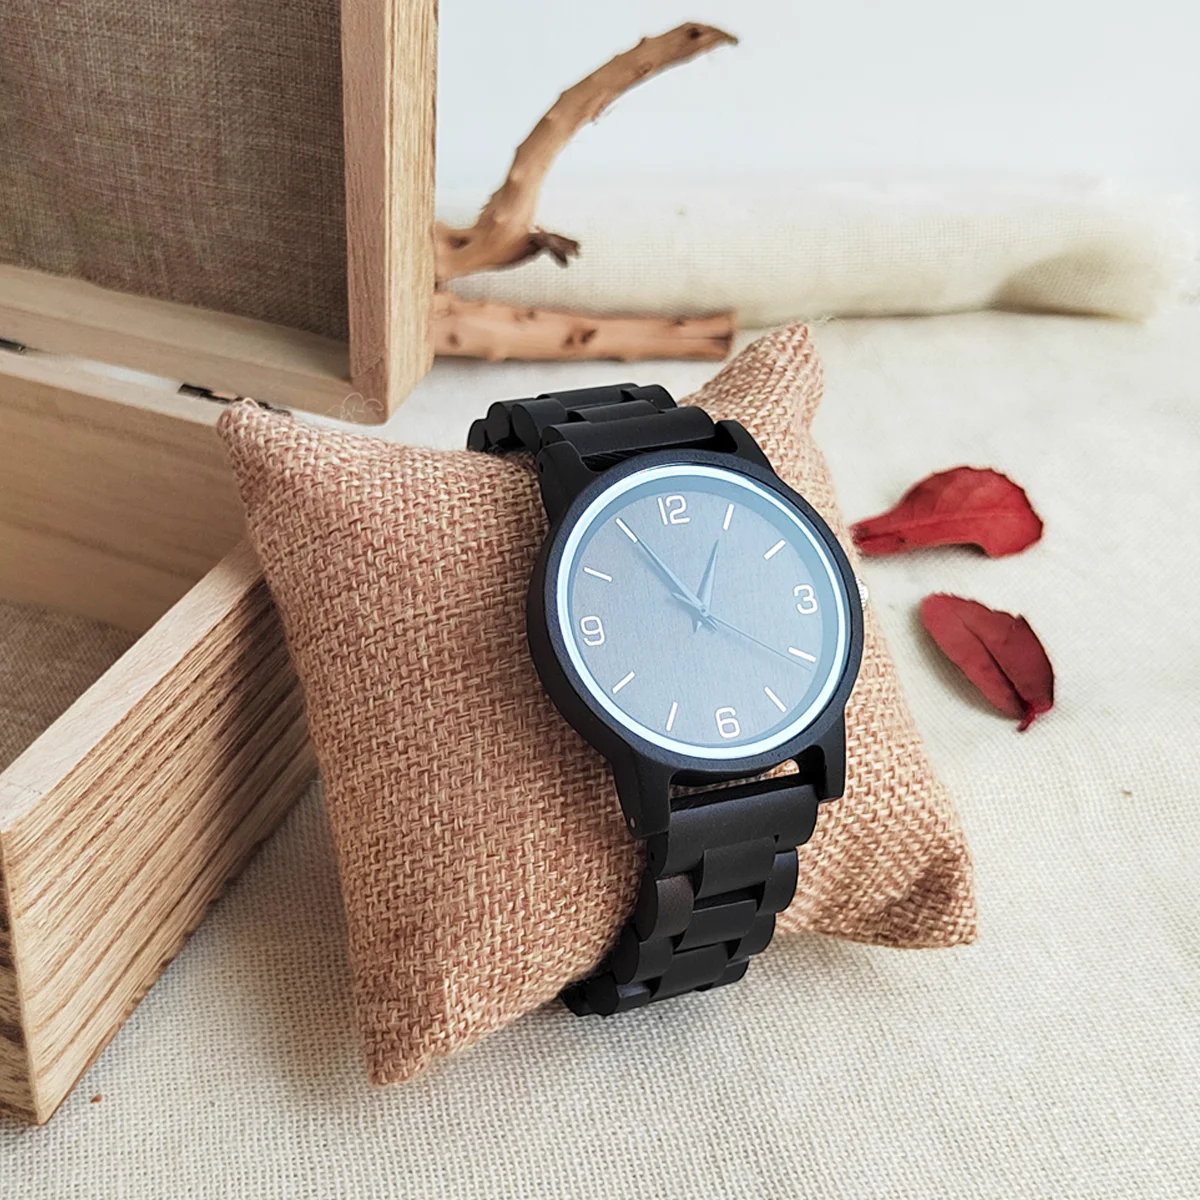 

Watch Men Women Wooden Wristwatches Quartz Movement Watches With Gift Box Timepieces Relogio Masculino Dropshipping Wood Clock